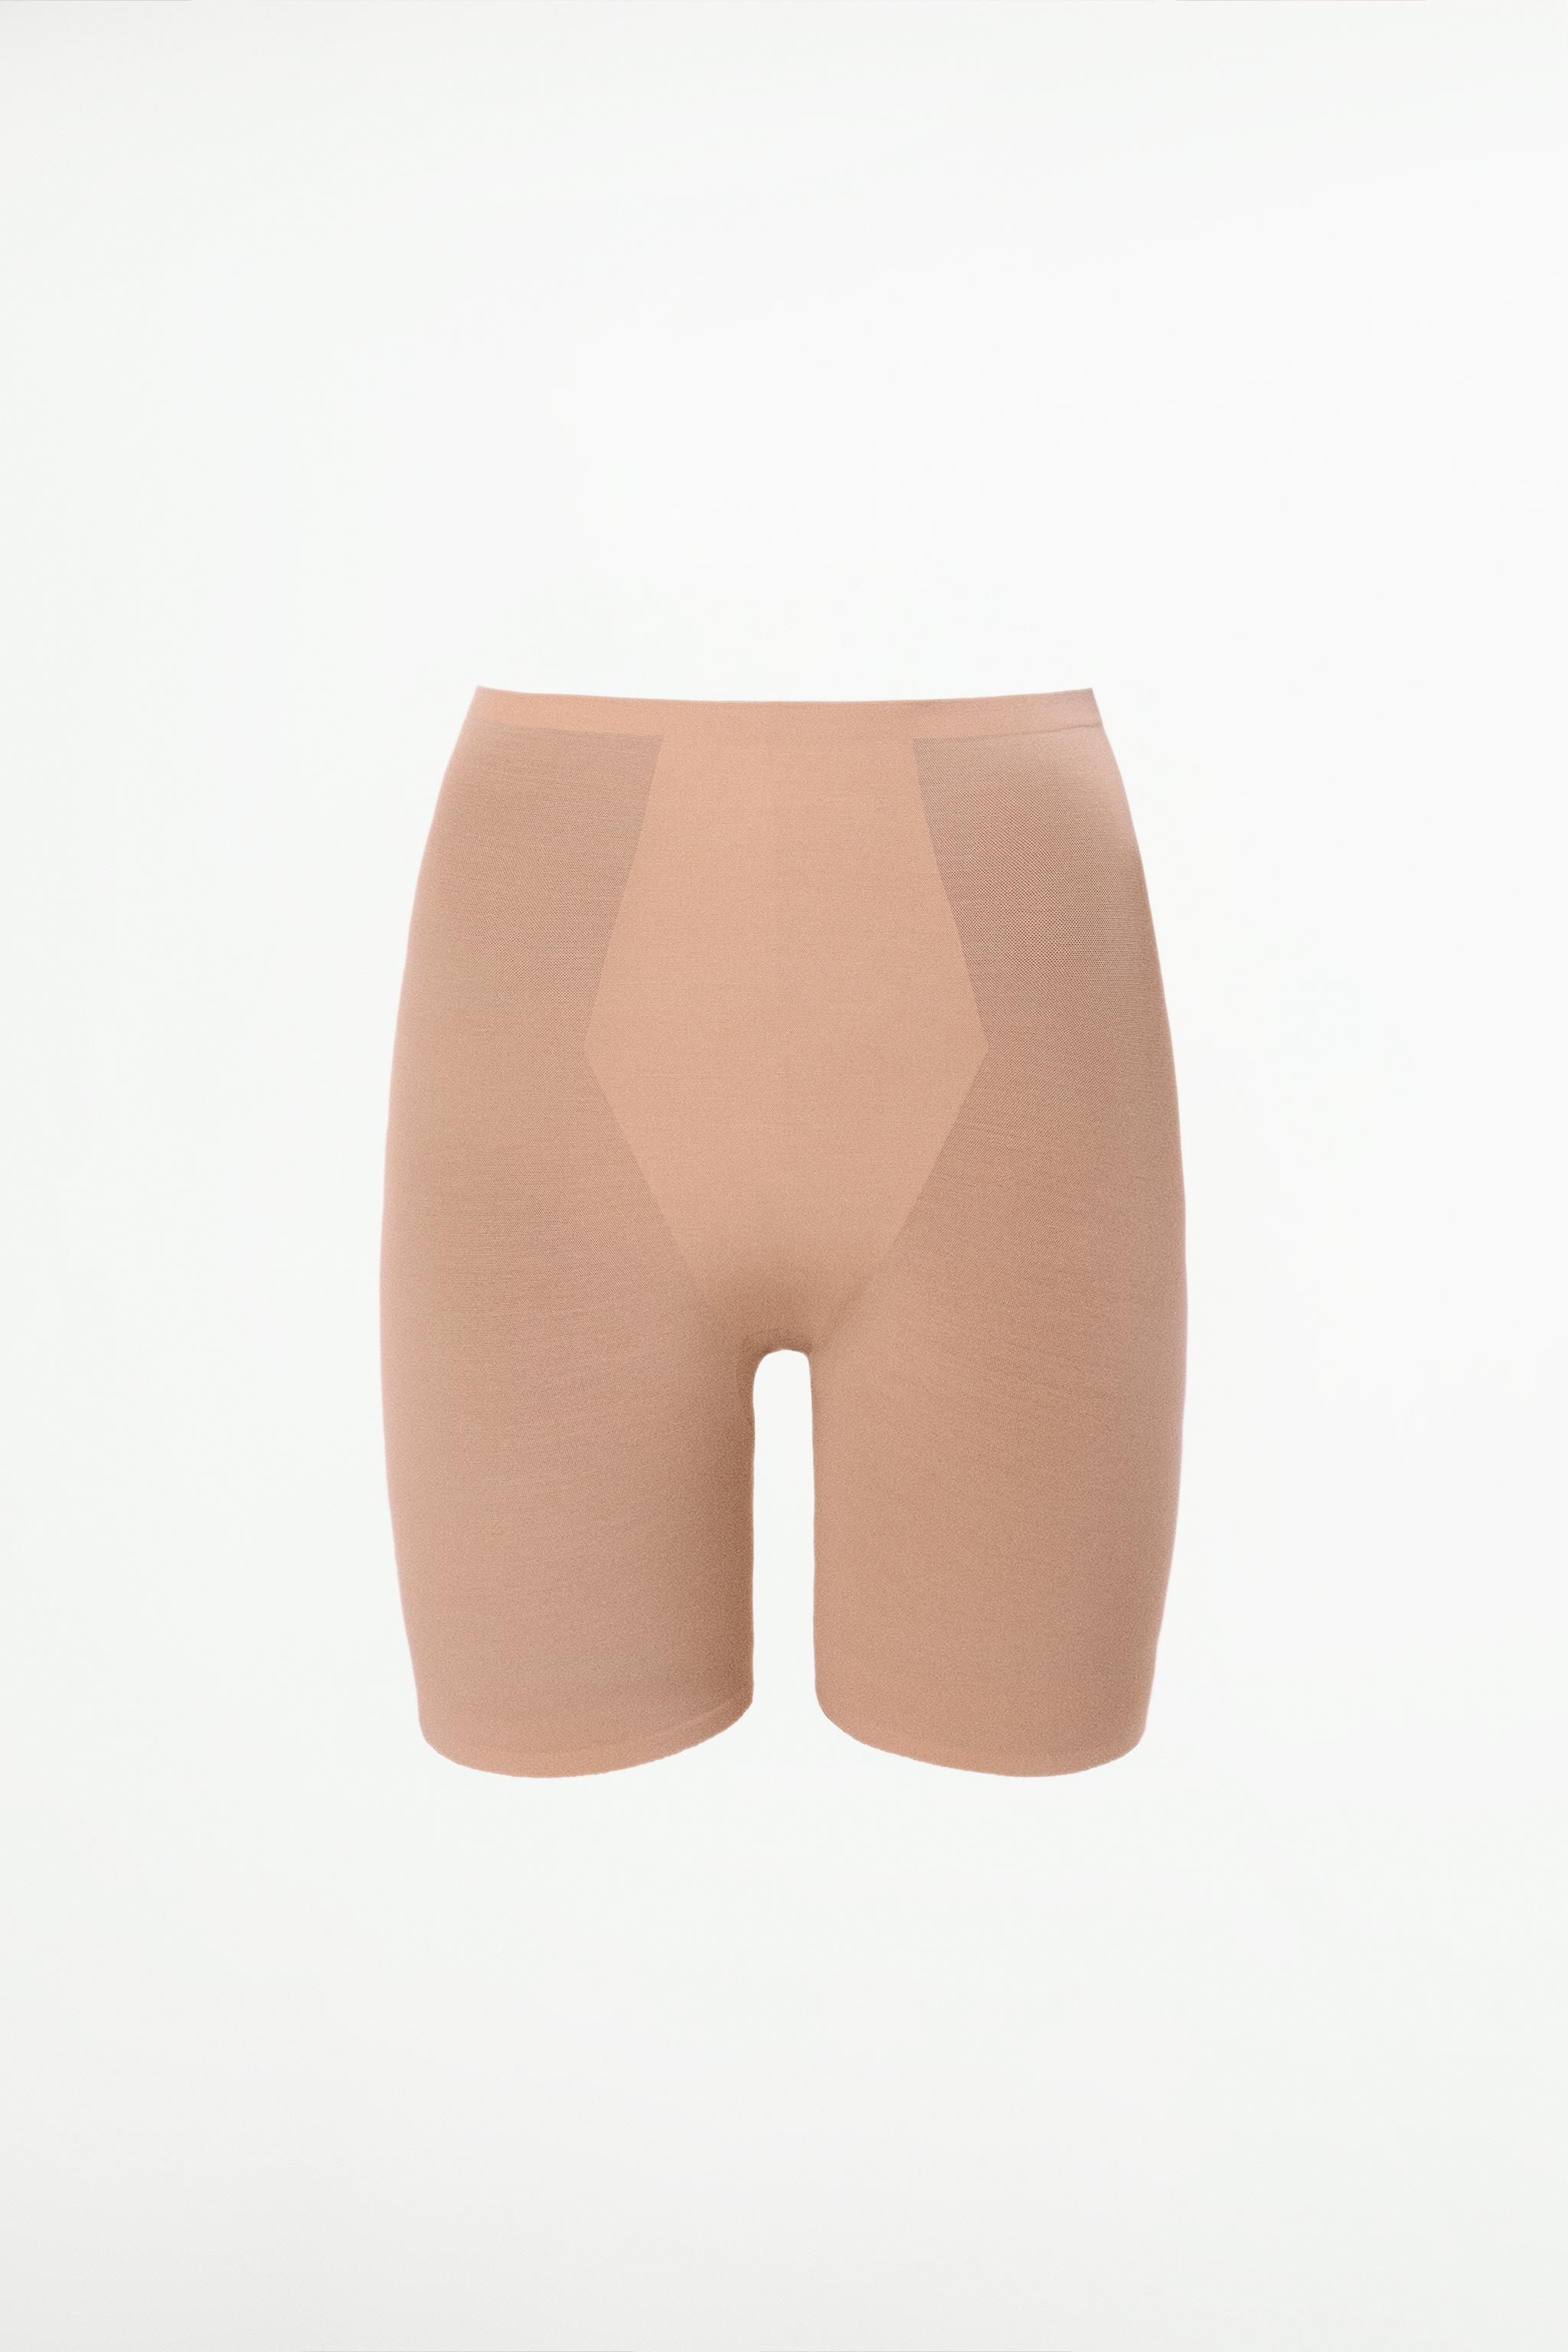 SCULPTING SHORTS - Champagne